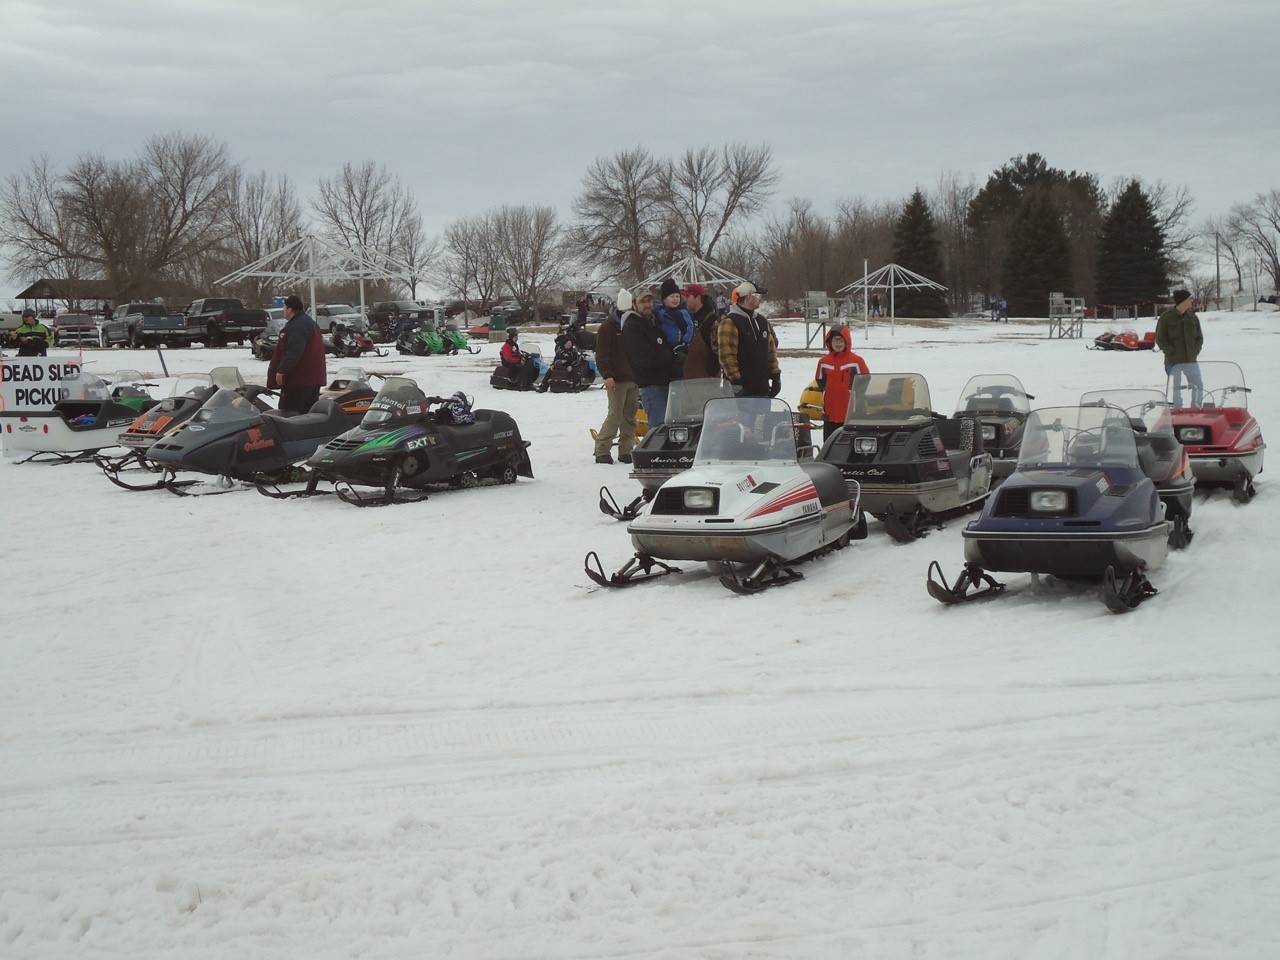 Vintage Sleds and More in Waconia Snowmobile Magazine